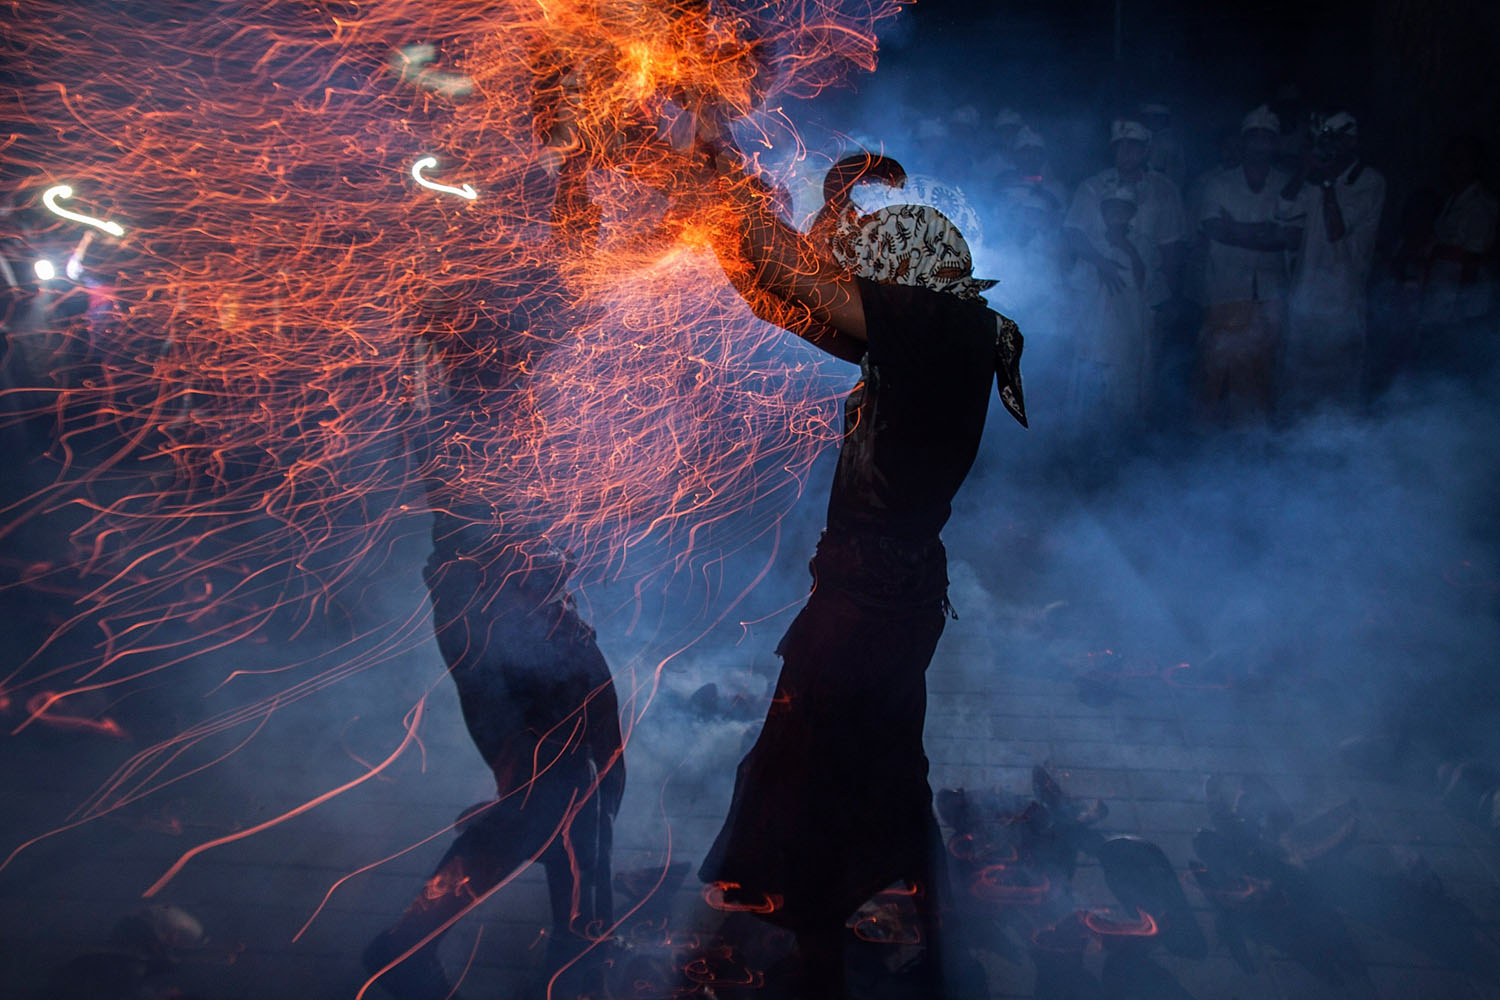 Oct. 19, 2013. Participants fight during fire war ceremony at Dalem Temple in Tuban, Kuta, Indonesia.